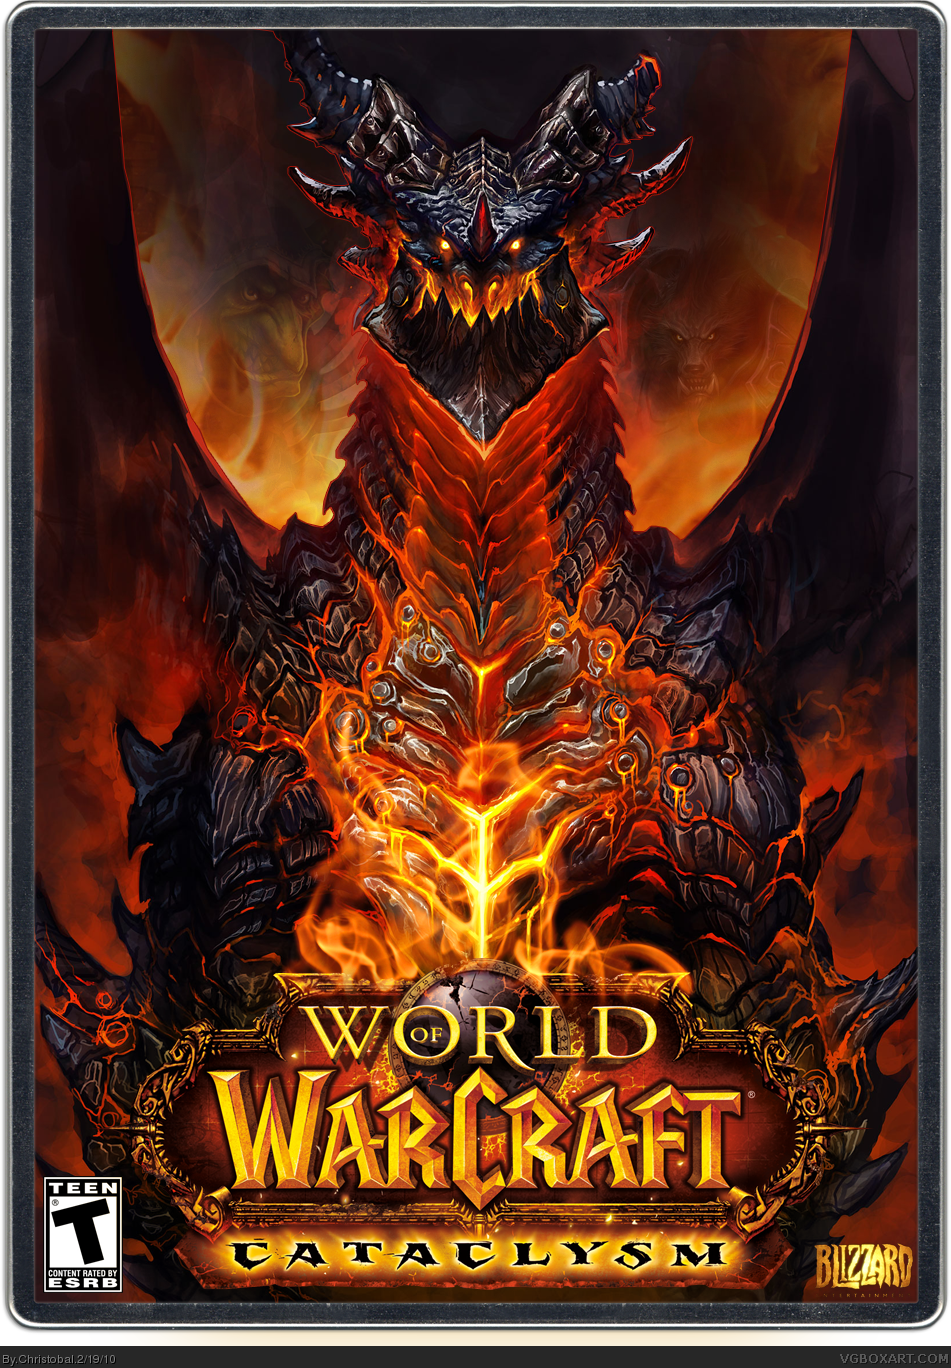 Viewing full size World of Warcraft: Cataclysm box cover